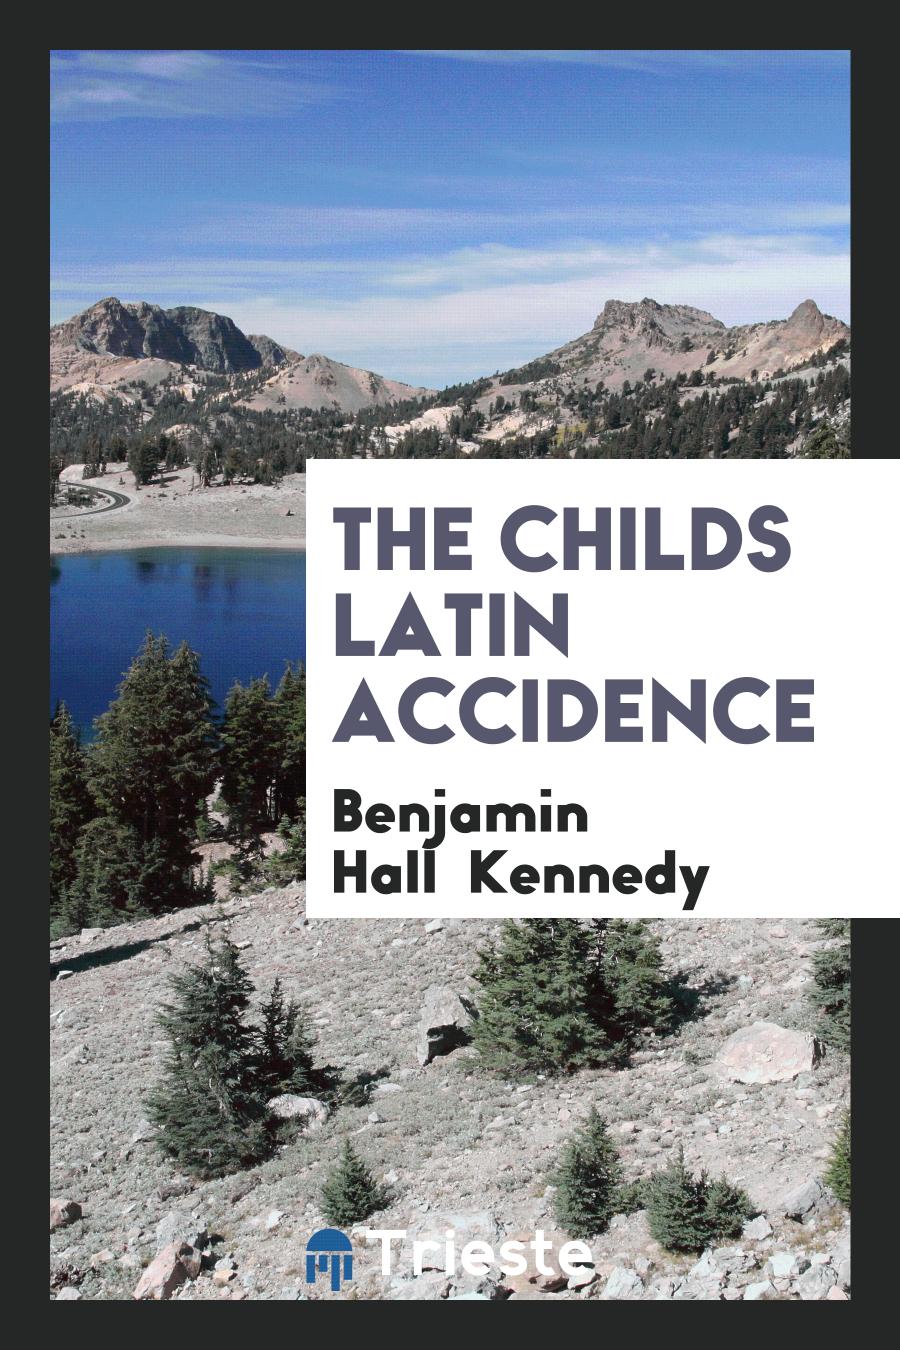 Benjamin Hall  Kennedy - The childs latin accidence